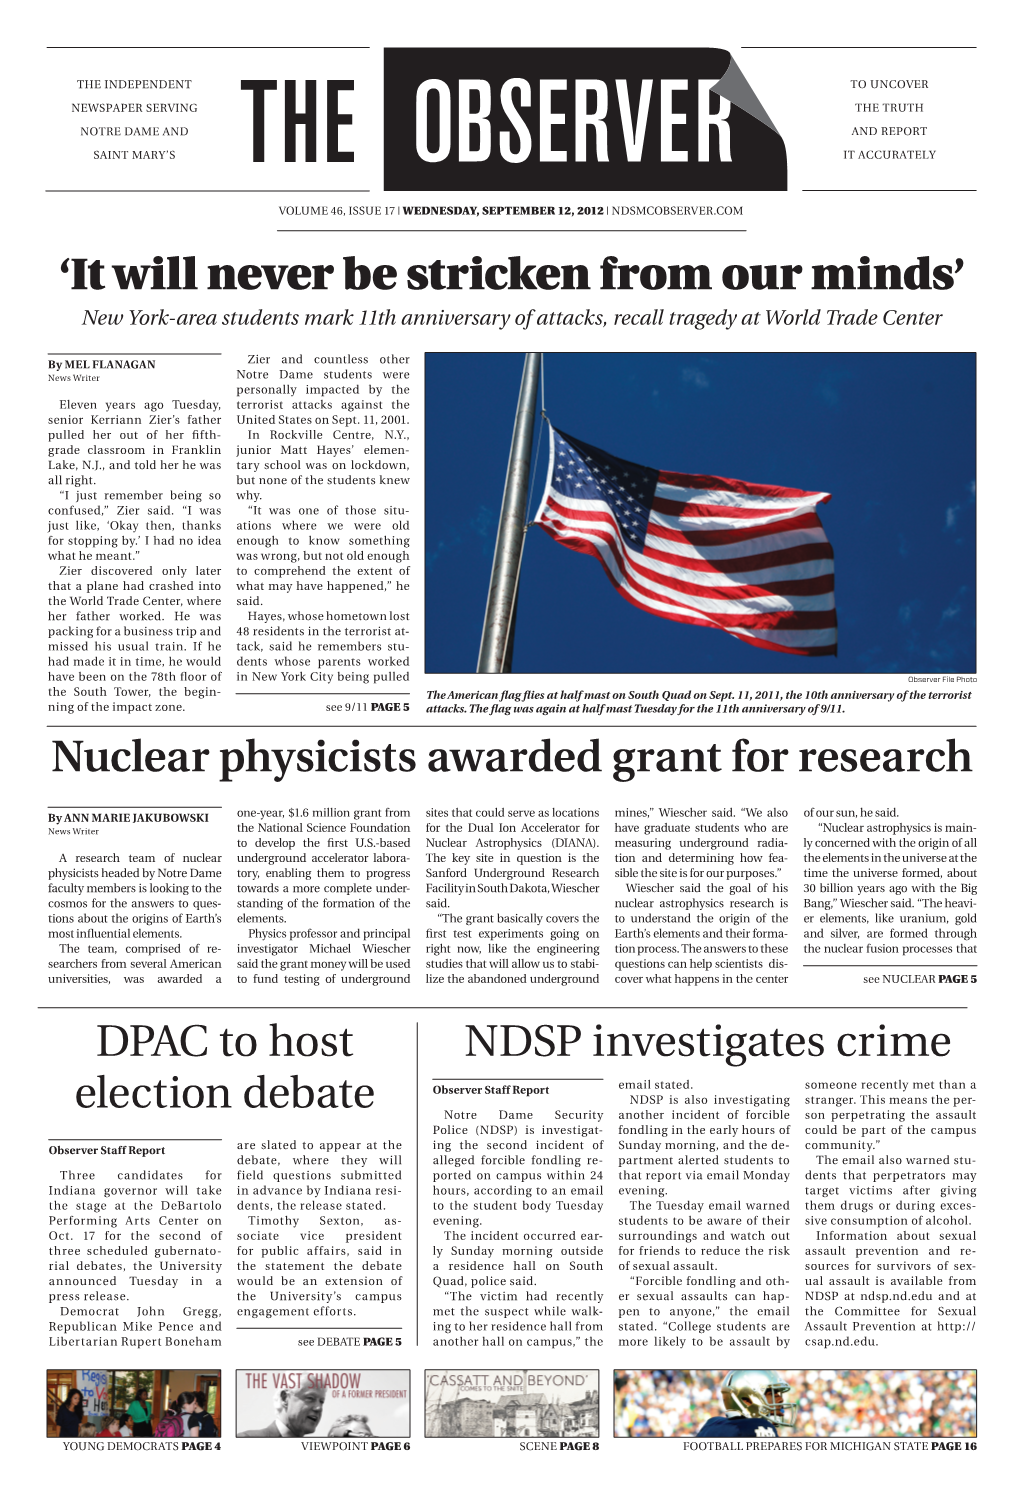 Nuclear Physicists Awarded Grant for Research Dpac to Host Election